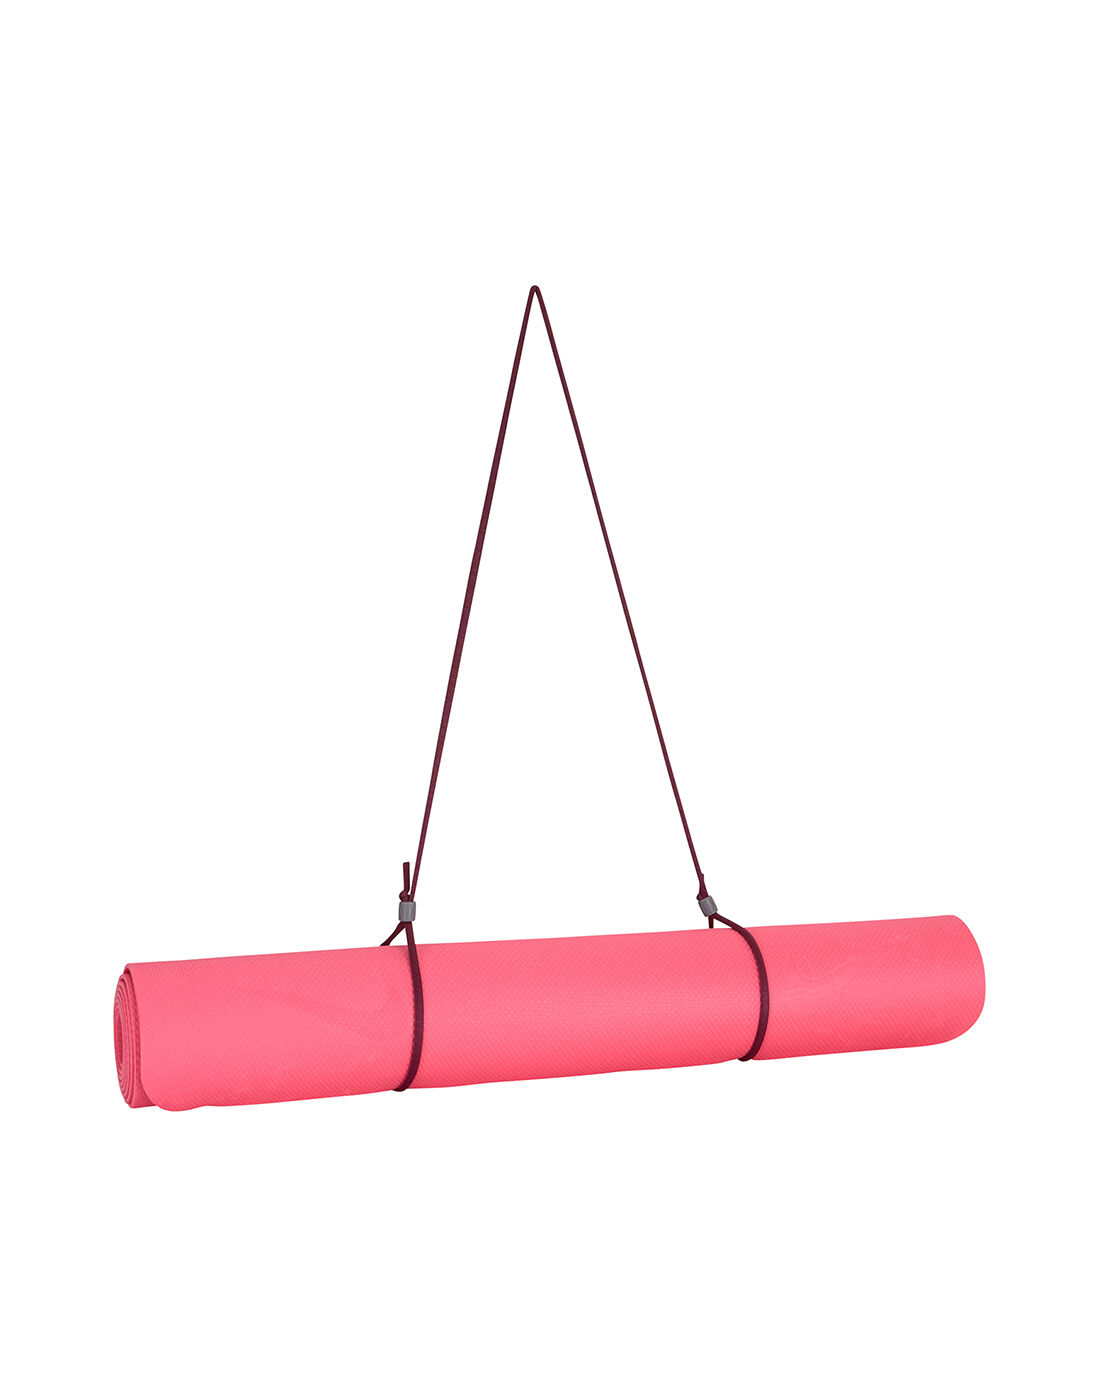 Nike Just Do It Yoga Mat 2.0 - Pink 